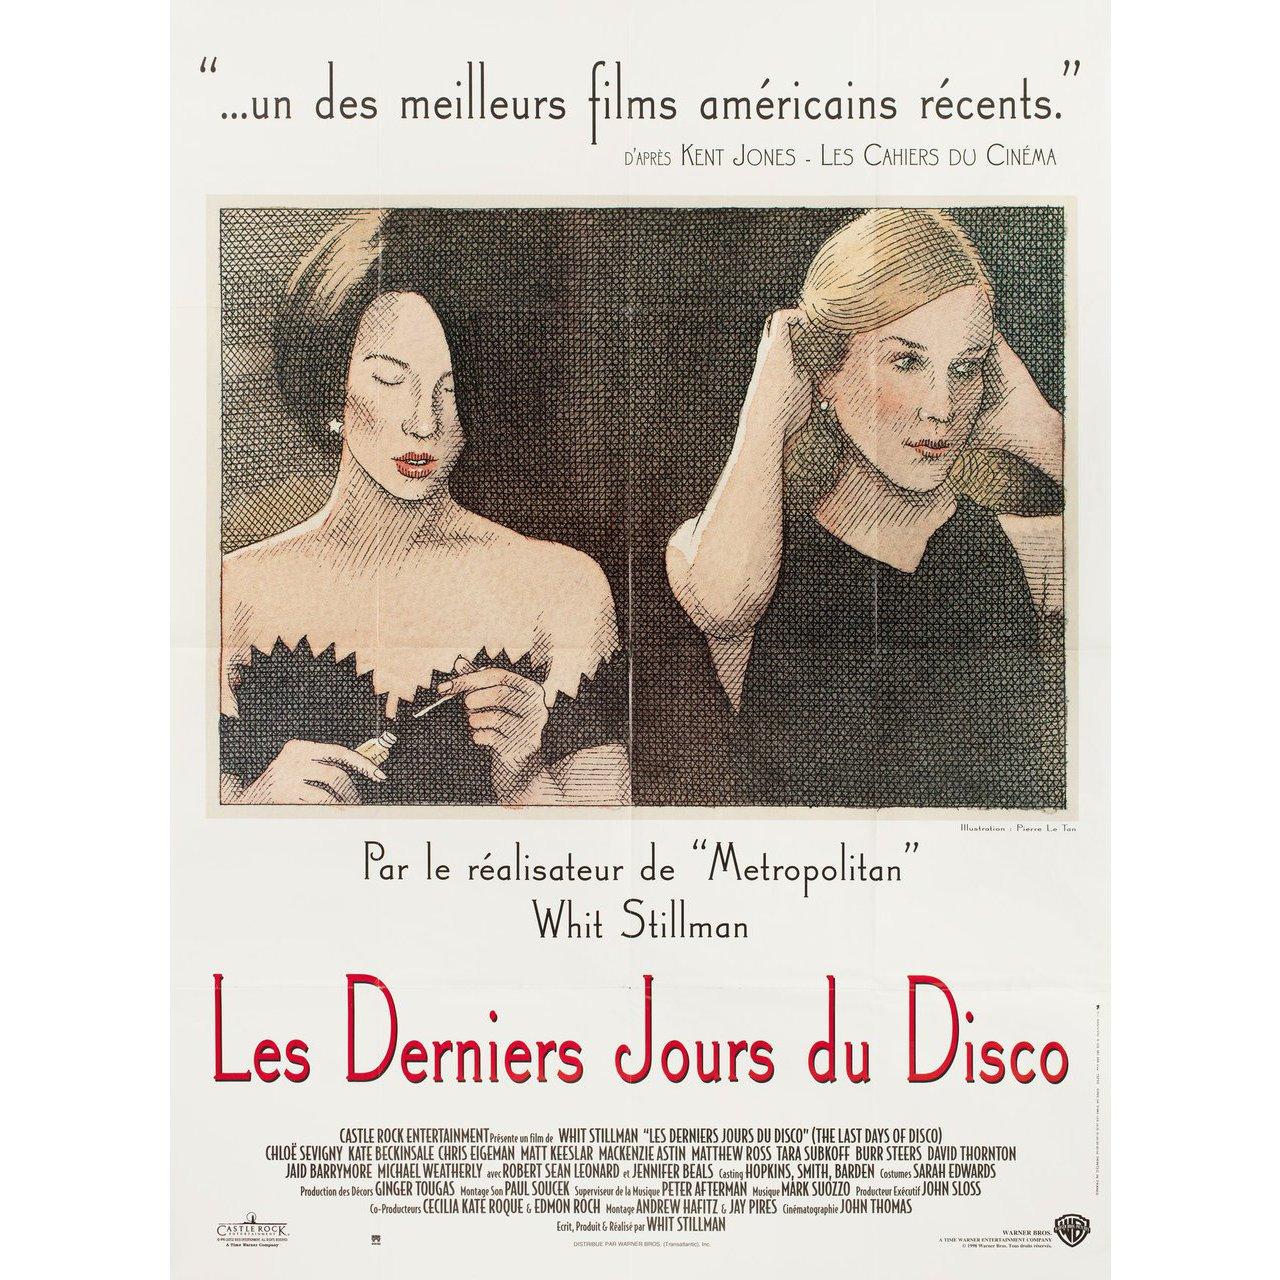 Original 1998 French grande poster by Pierre Le-Tan for the film The Last Days of Disco directed by Whit Stillman with Chloe Sevigny / Kate Beckinsale / Chris Eigeman / Mackenzie Astin. Very Good-Fine condition, folded. Many original posters were